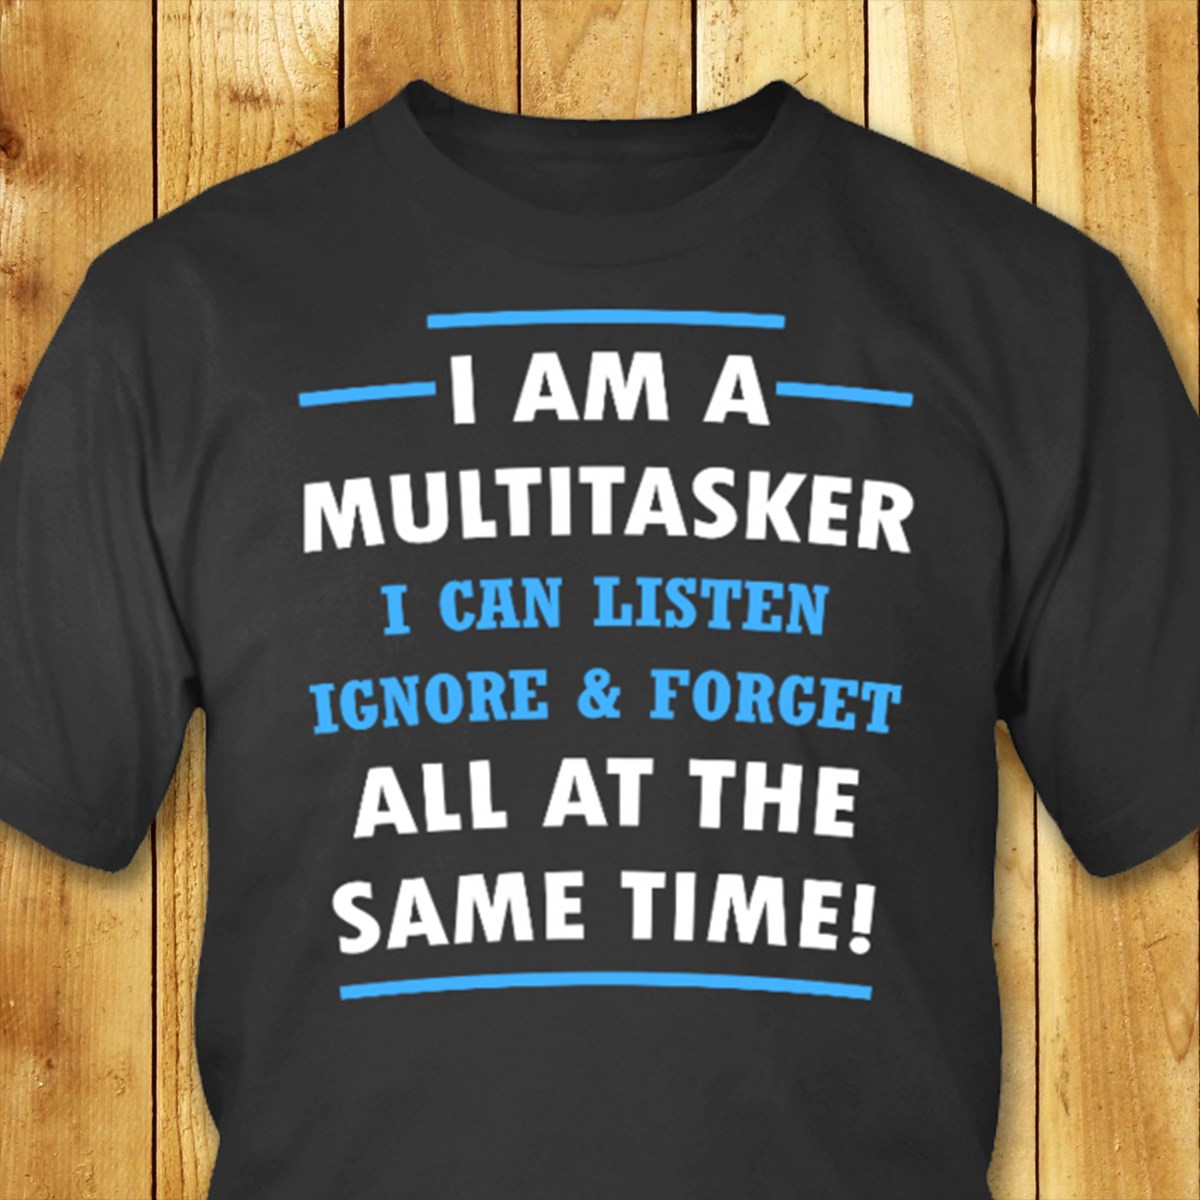 I am a multitasker i can listen ignore & forget all at the same time!